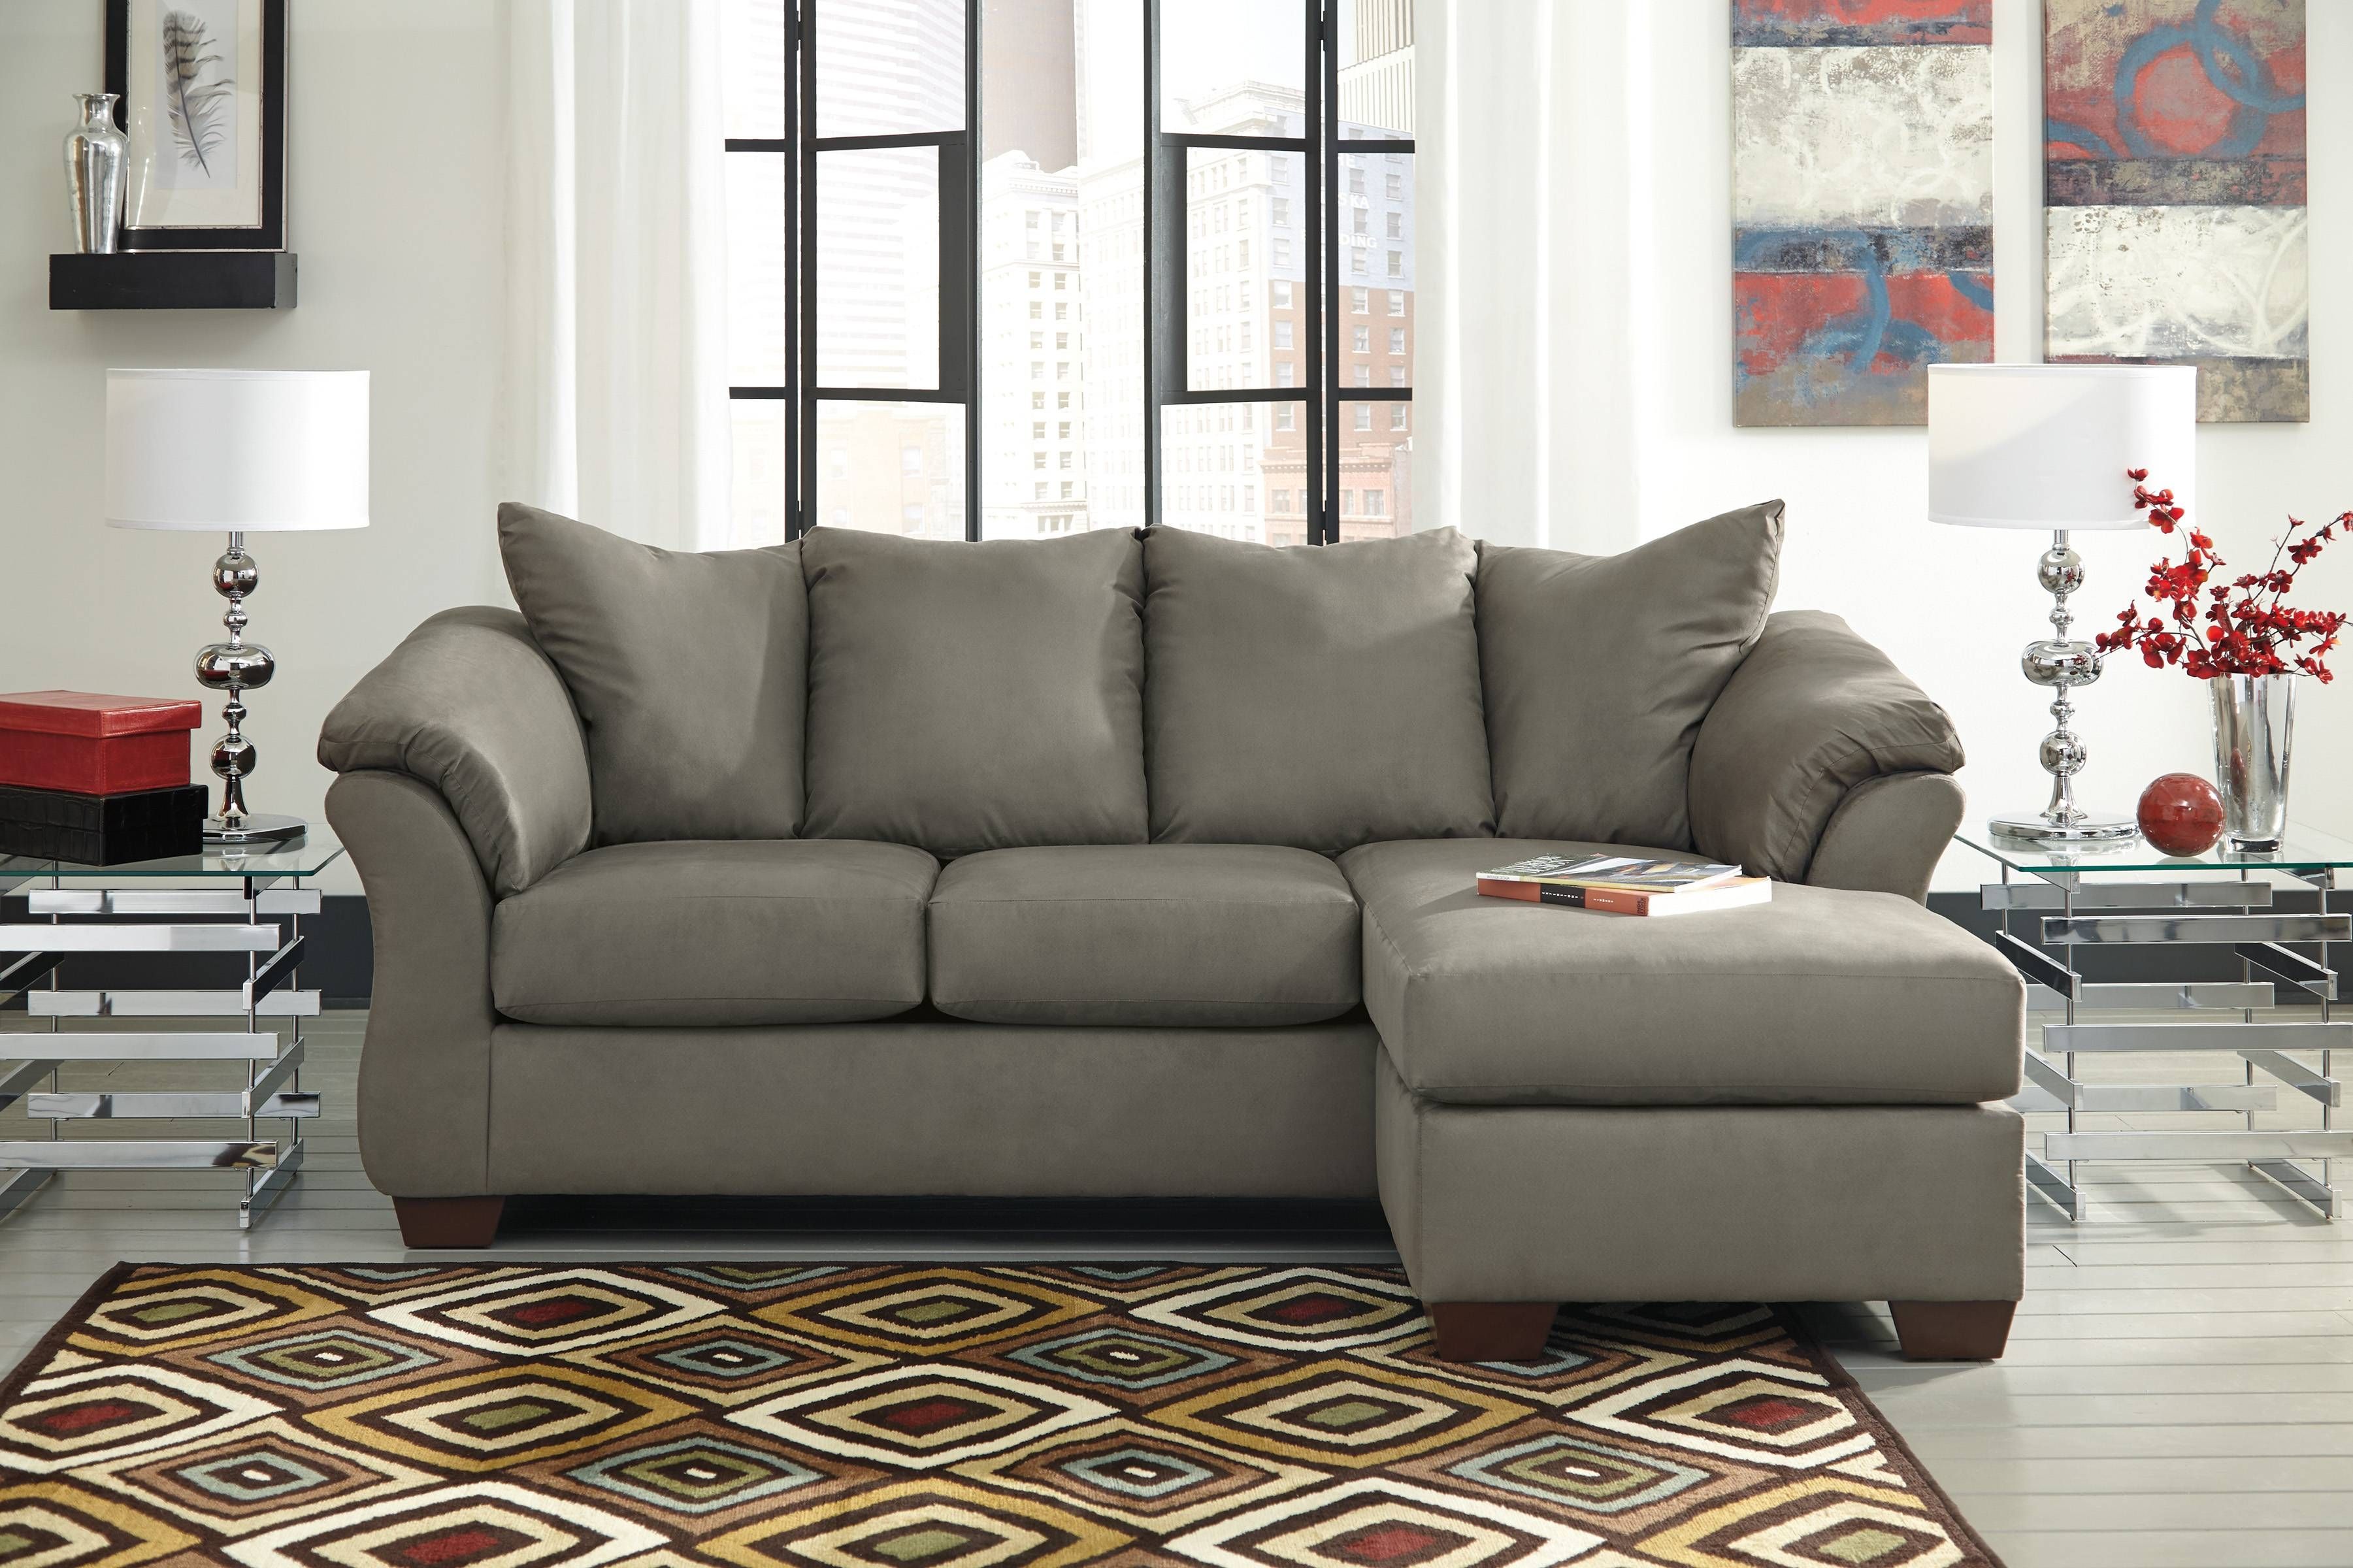 Best 15+ of Ashley Furniture Leather Sectional Sofas